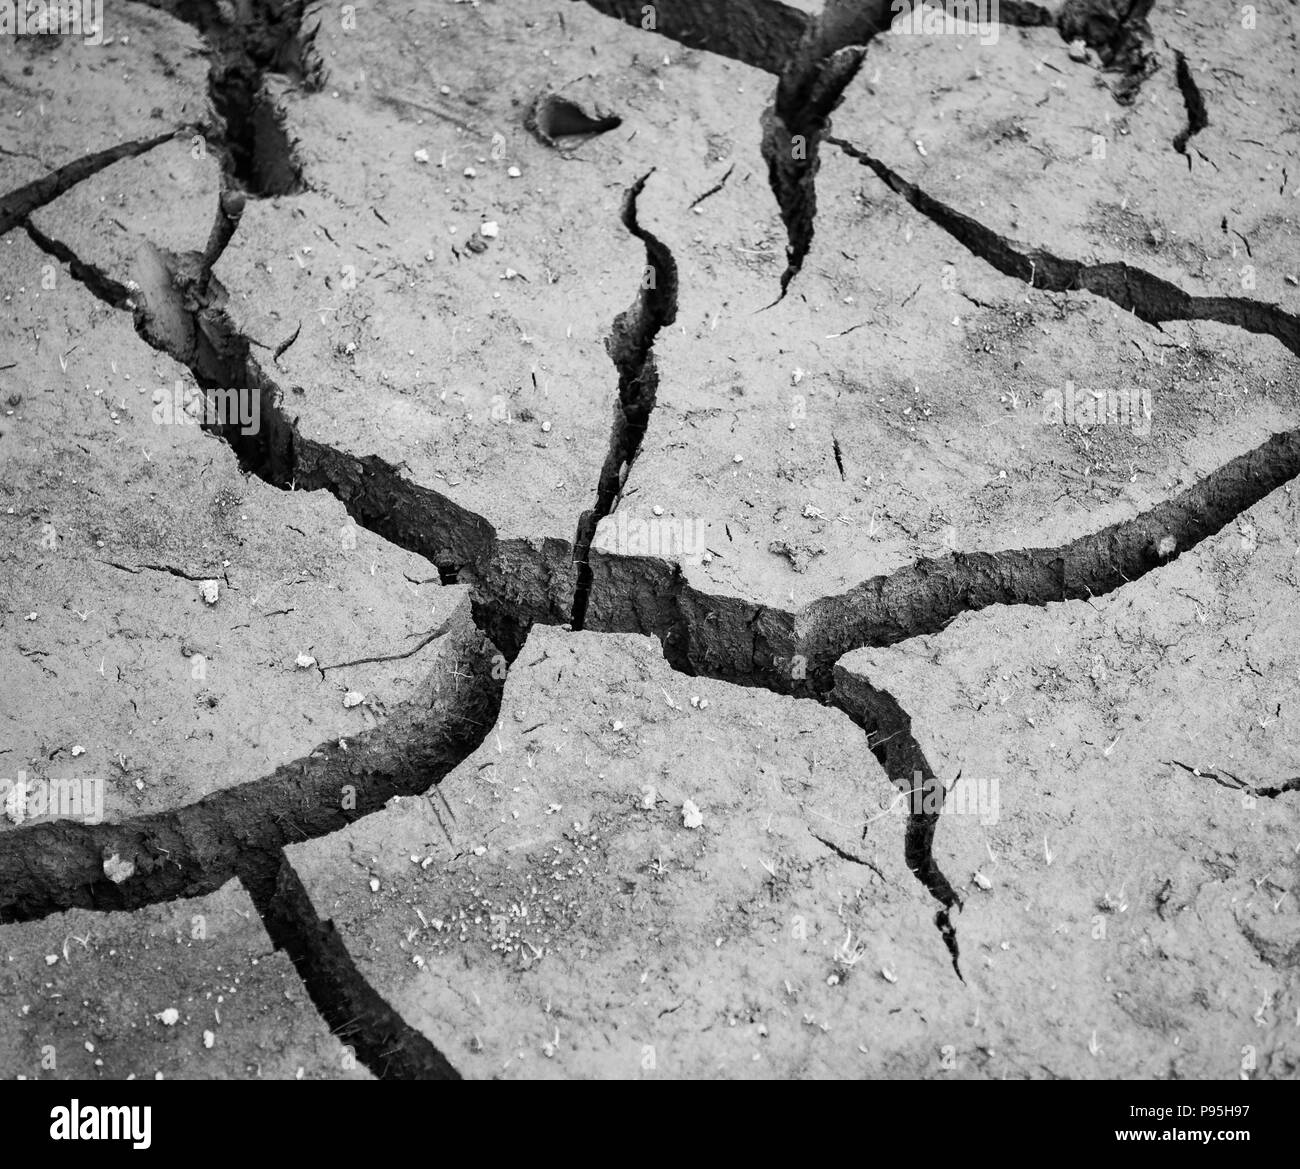 Dry cracked mud at the bottom of dried reservoir Stock Photo